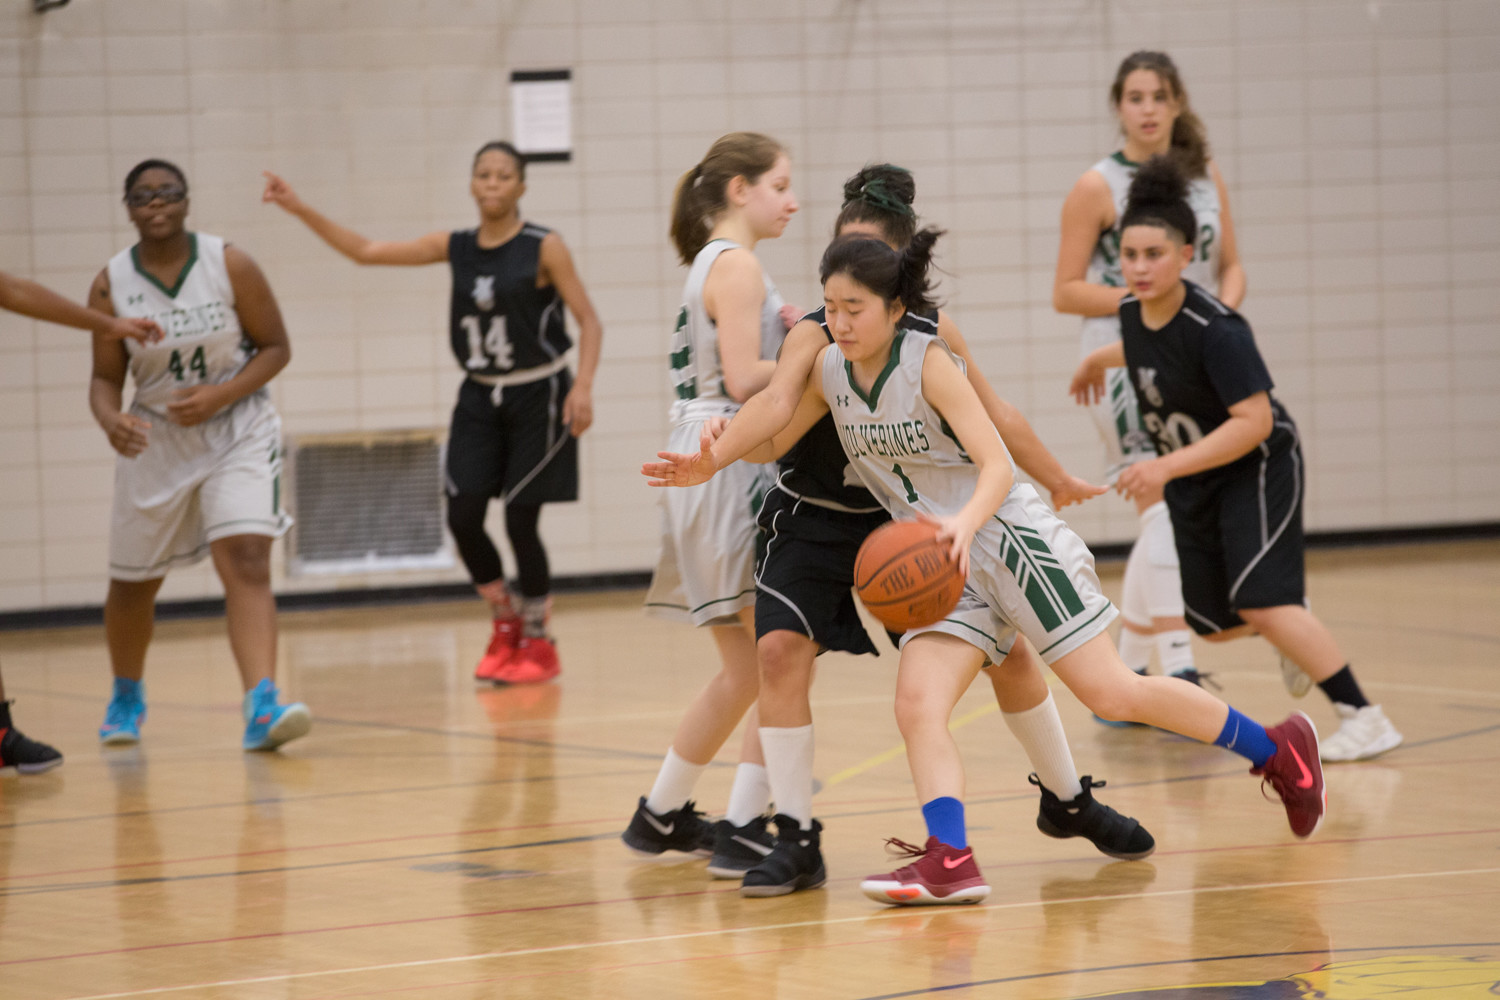 Bronx Science senior guard Michelle Kim watched her career come to an end in the Wolverines’ playoff loss to Brooklyn Community in the PSAL quarterfinals.